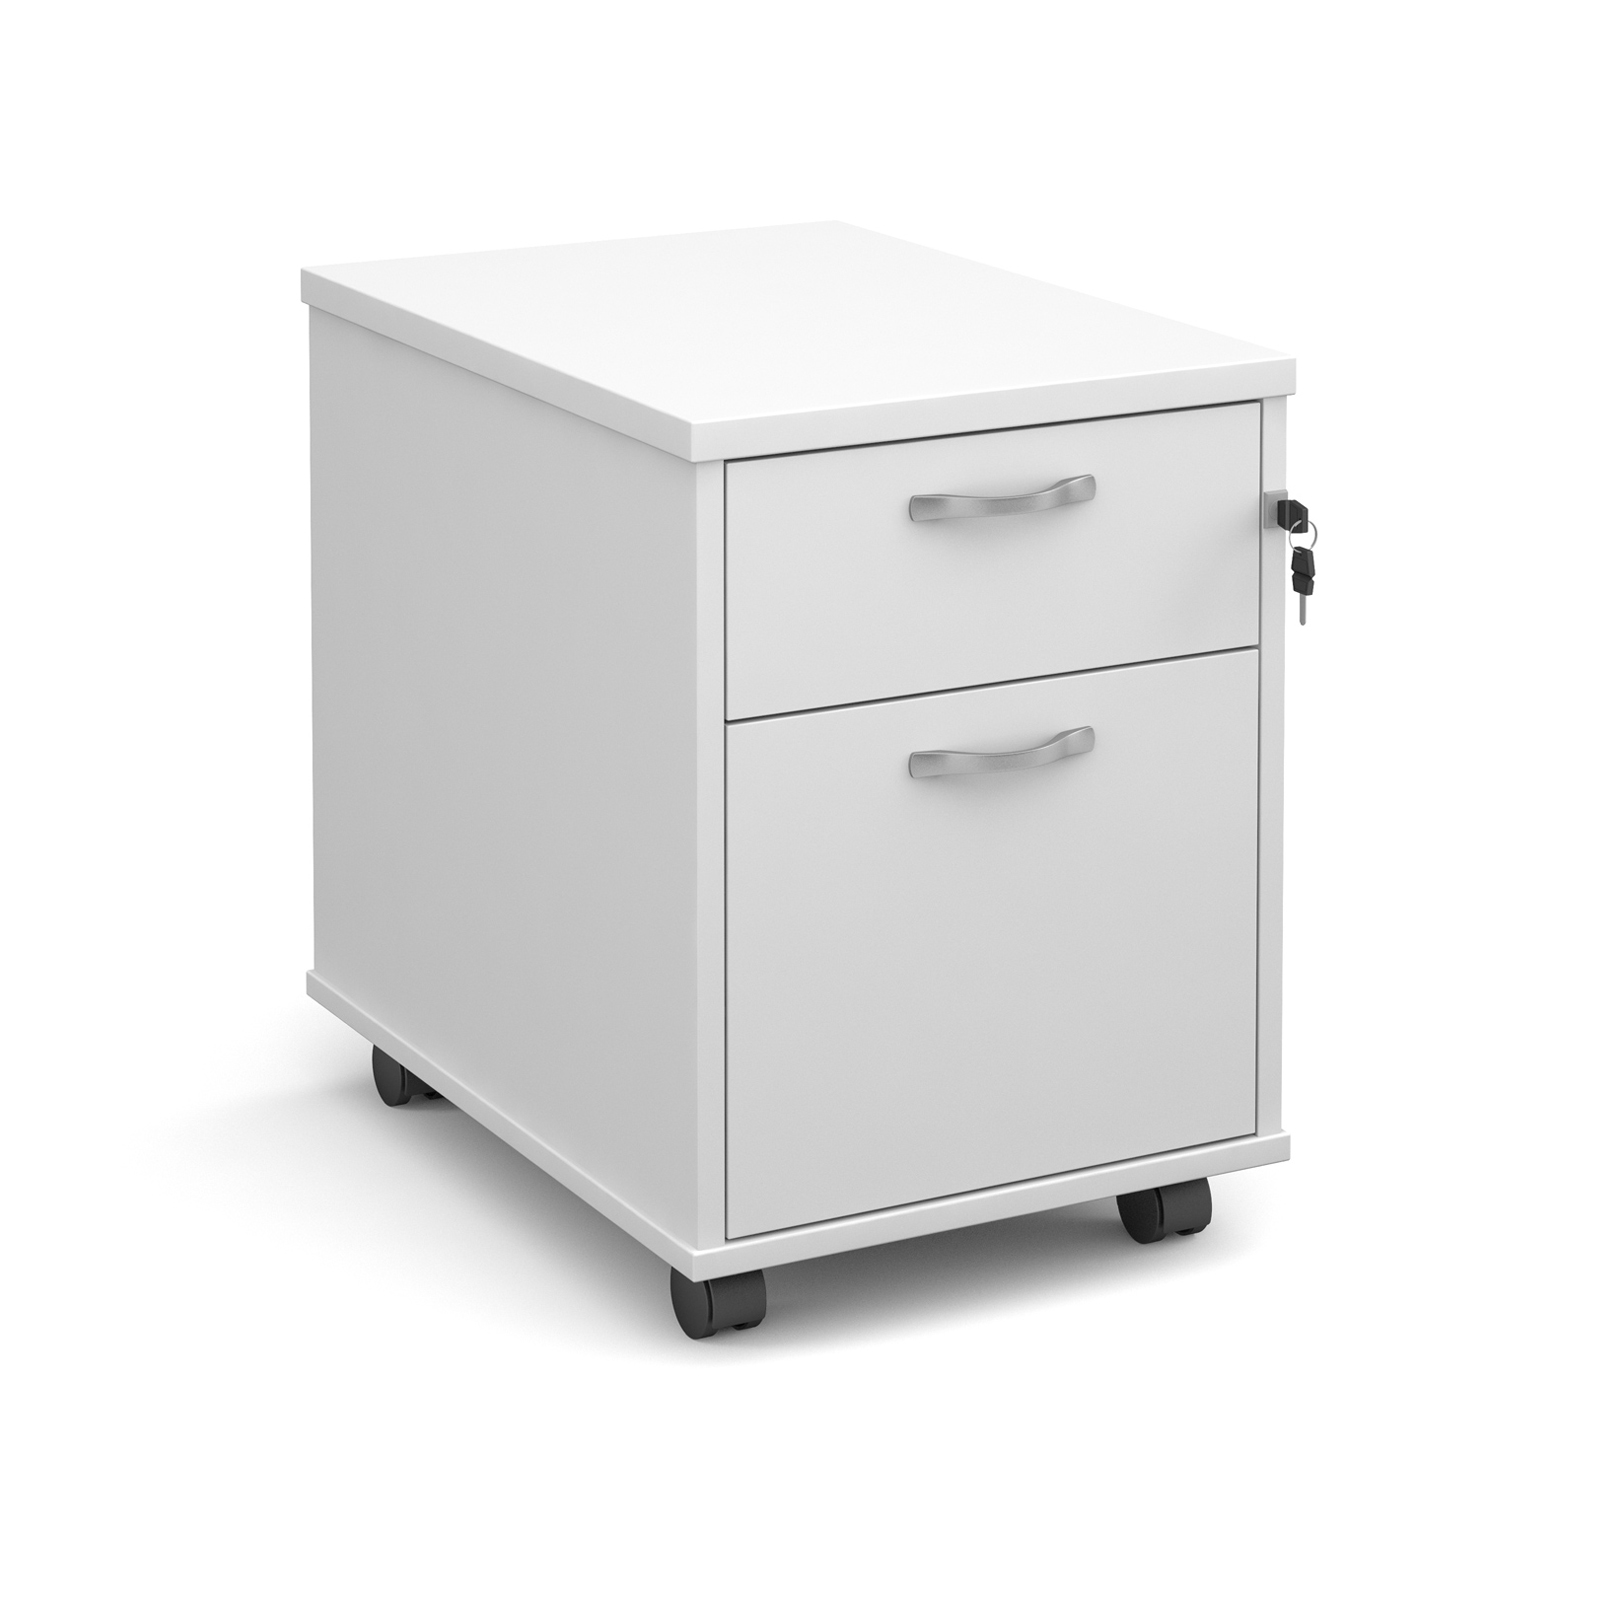 2 Drawer Mobile 2 drawer pedestal with silver handles 600mm deep - white